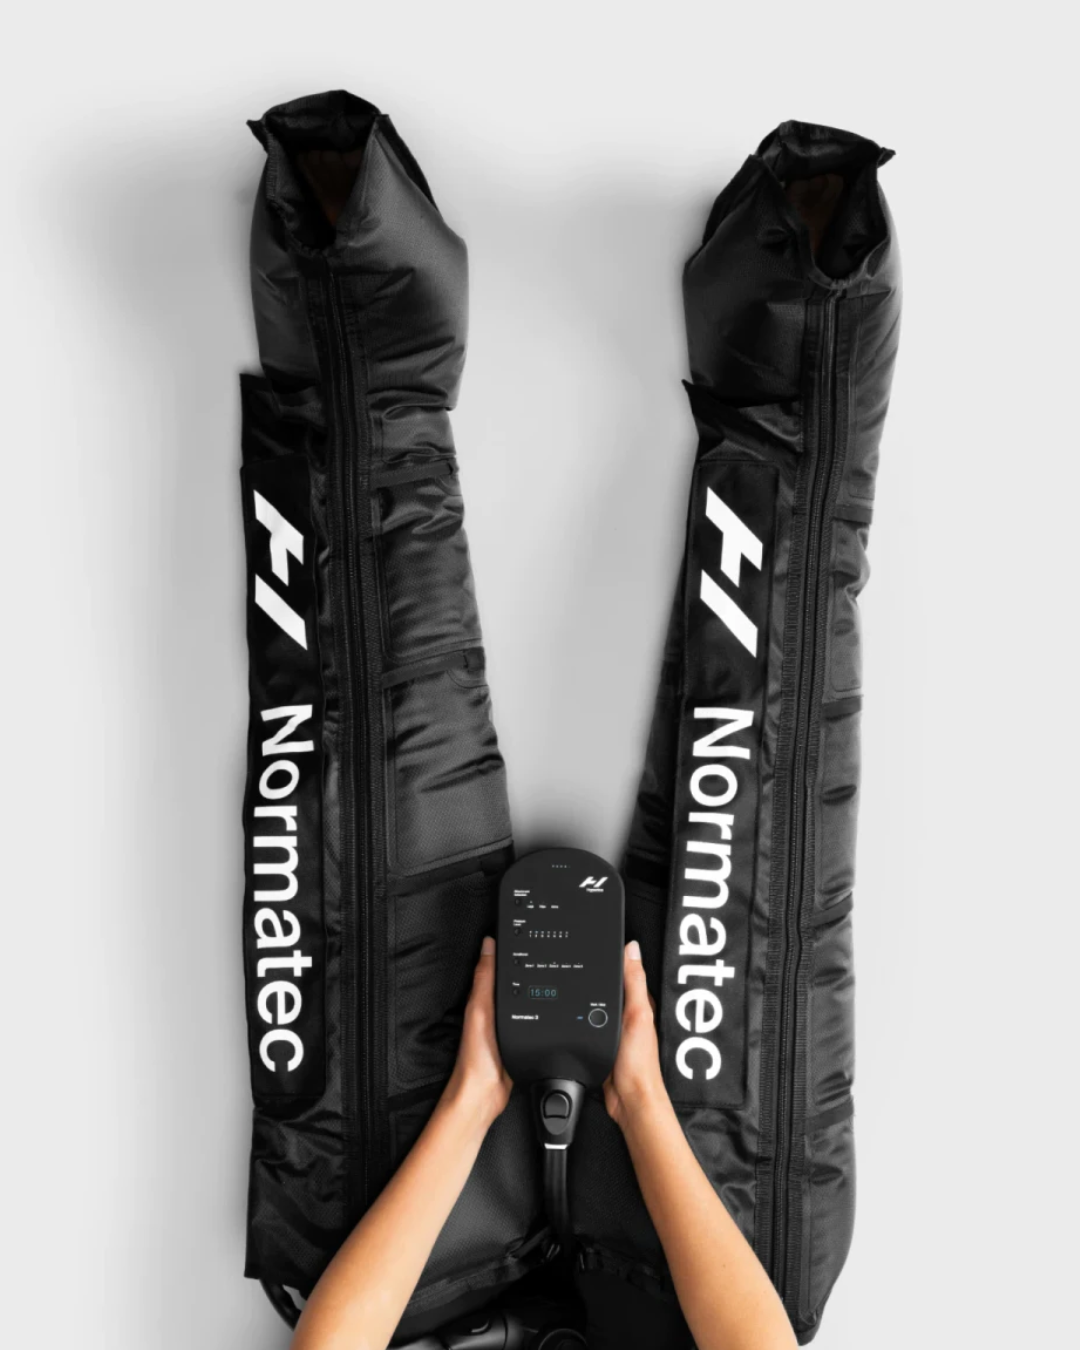 Normatec Pulse 3 Leg Recovery System - 17